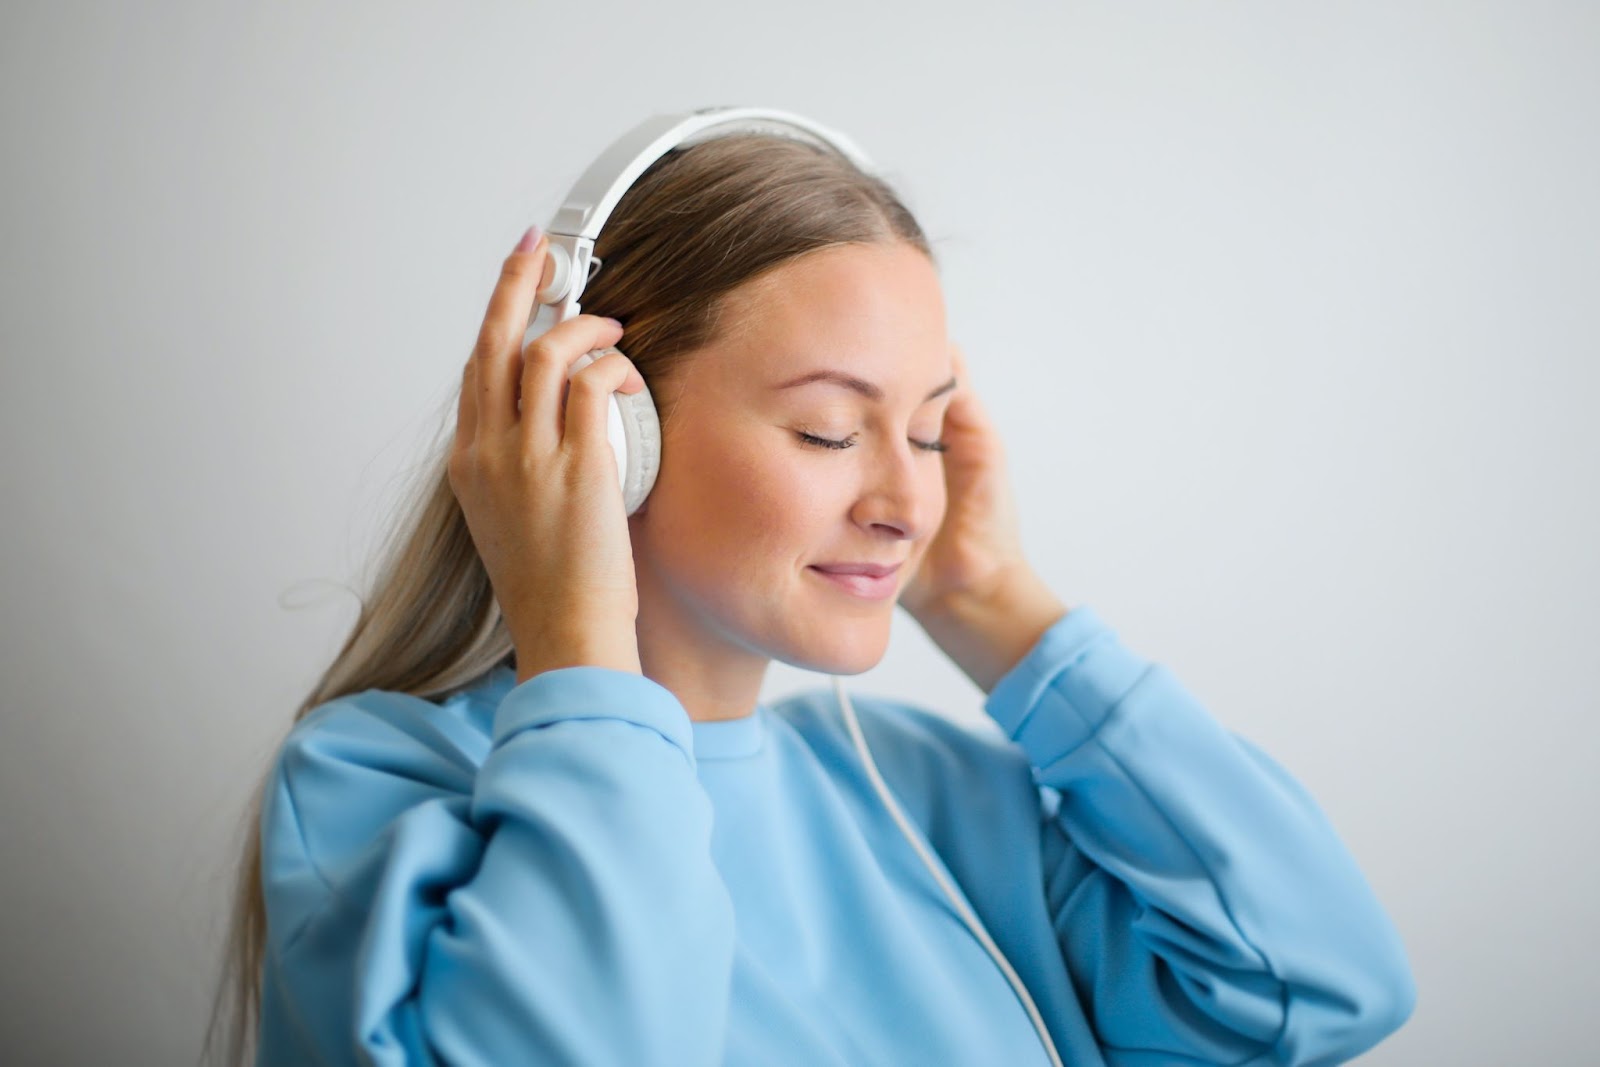 A lady wearing a light -blue sweatshirt listening to music on her whiter headphones - A list of the best Music APIs